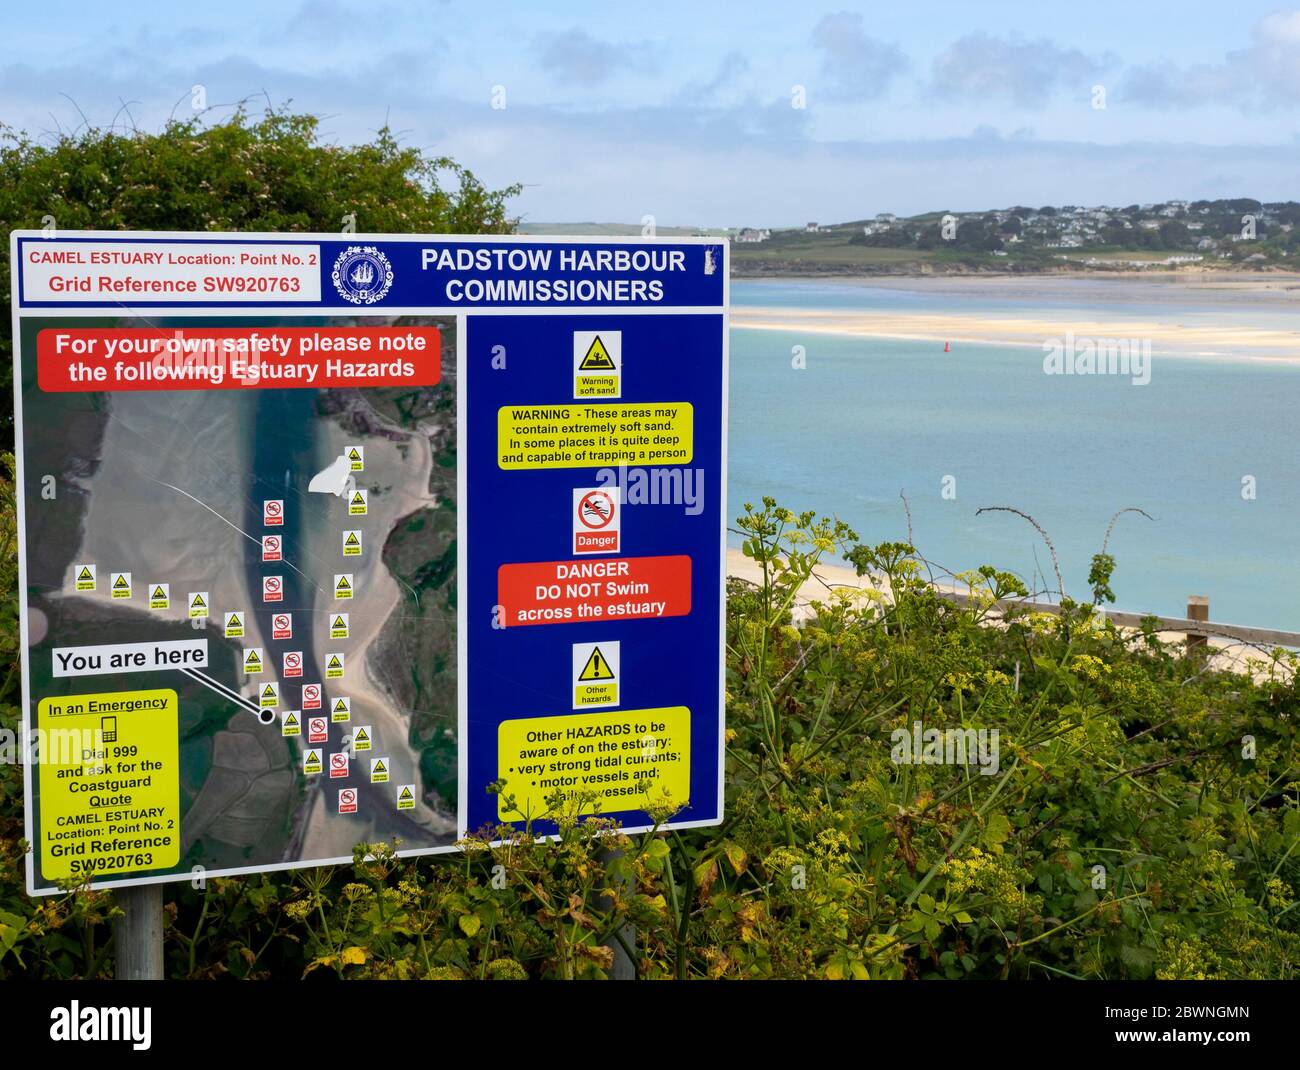 Padstow Harbour Commissioners Camel estuary hazards warning notice, Padstow, Cornwall, UK Stock Photo